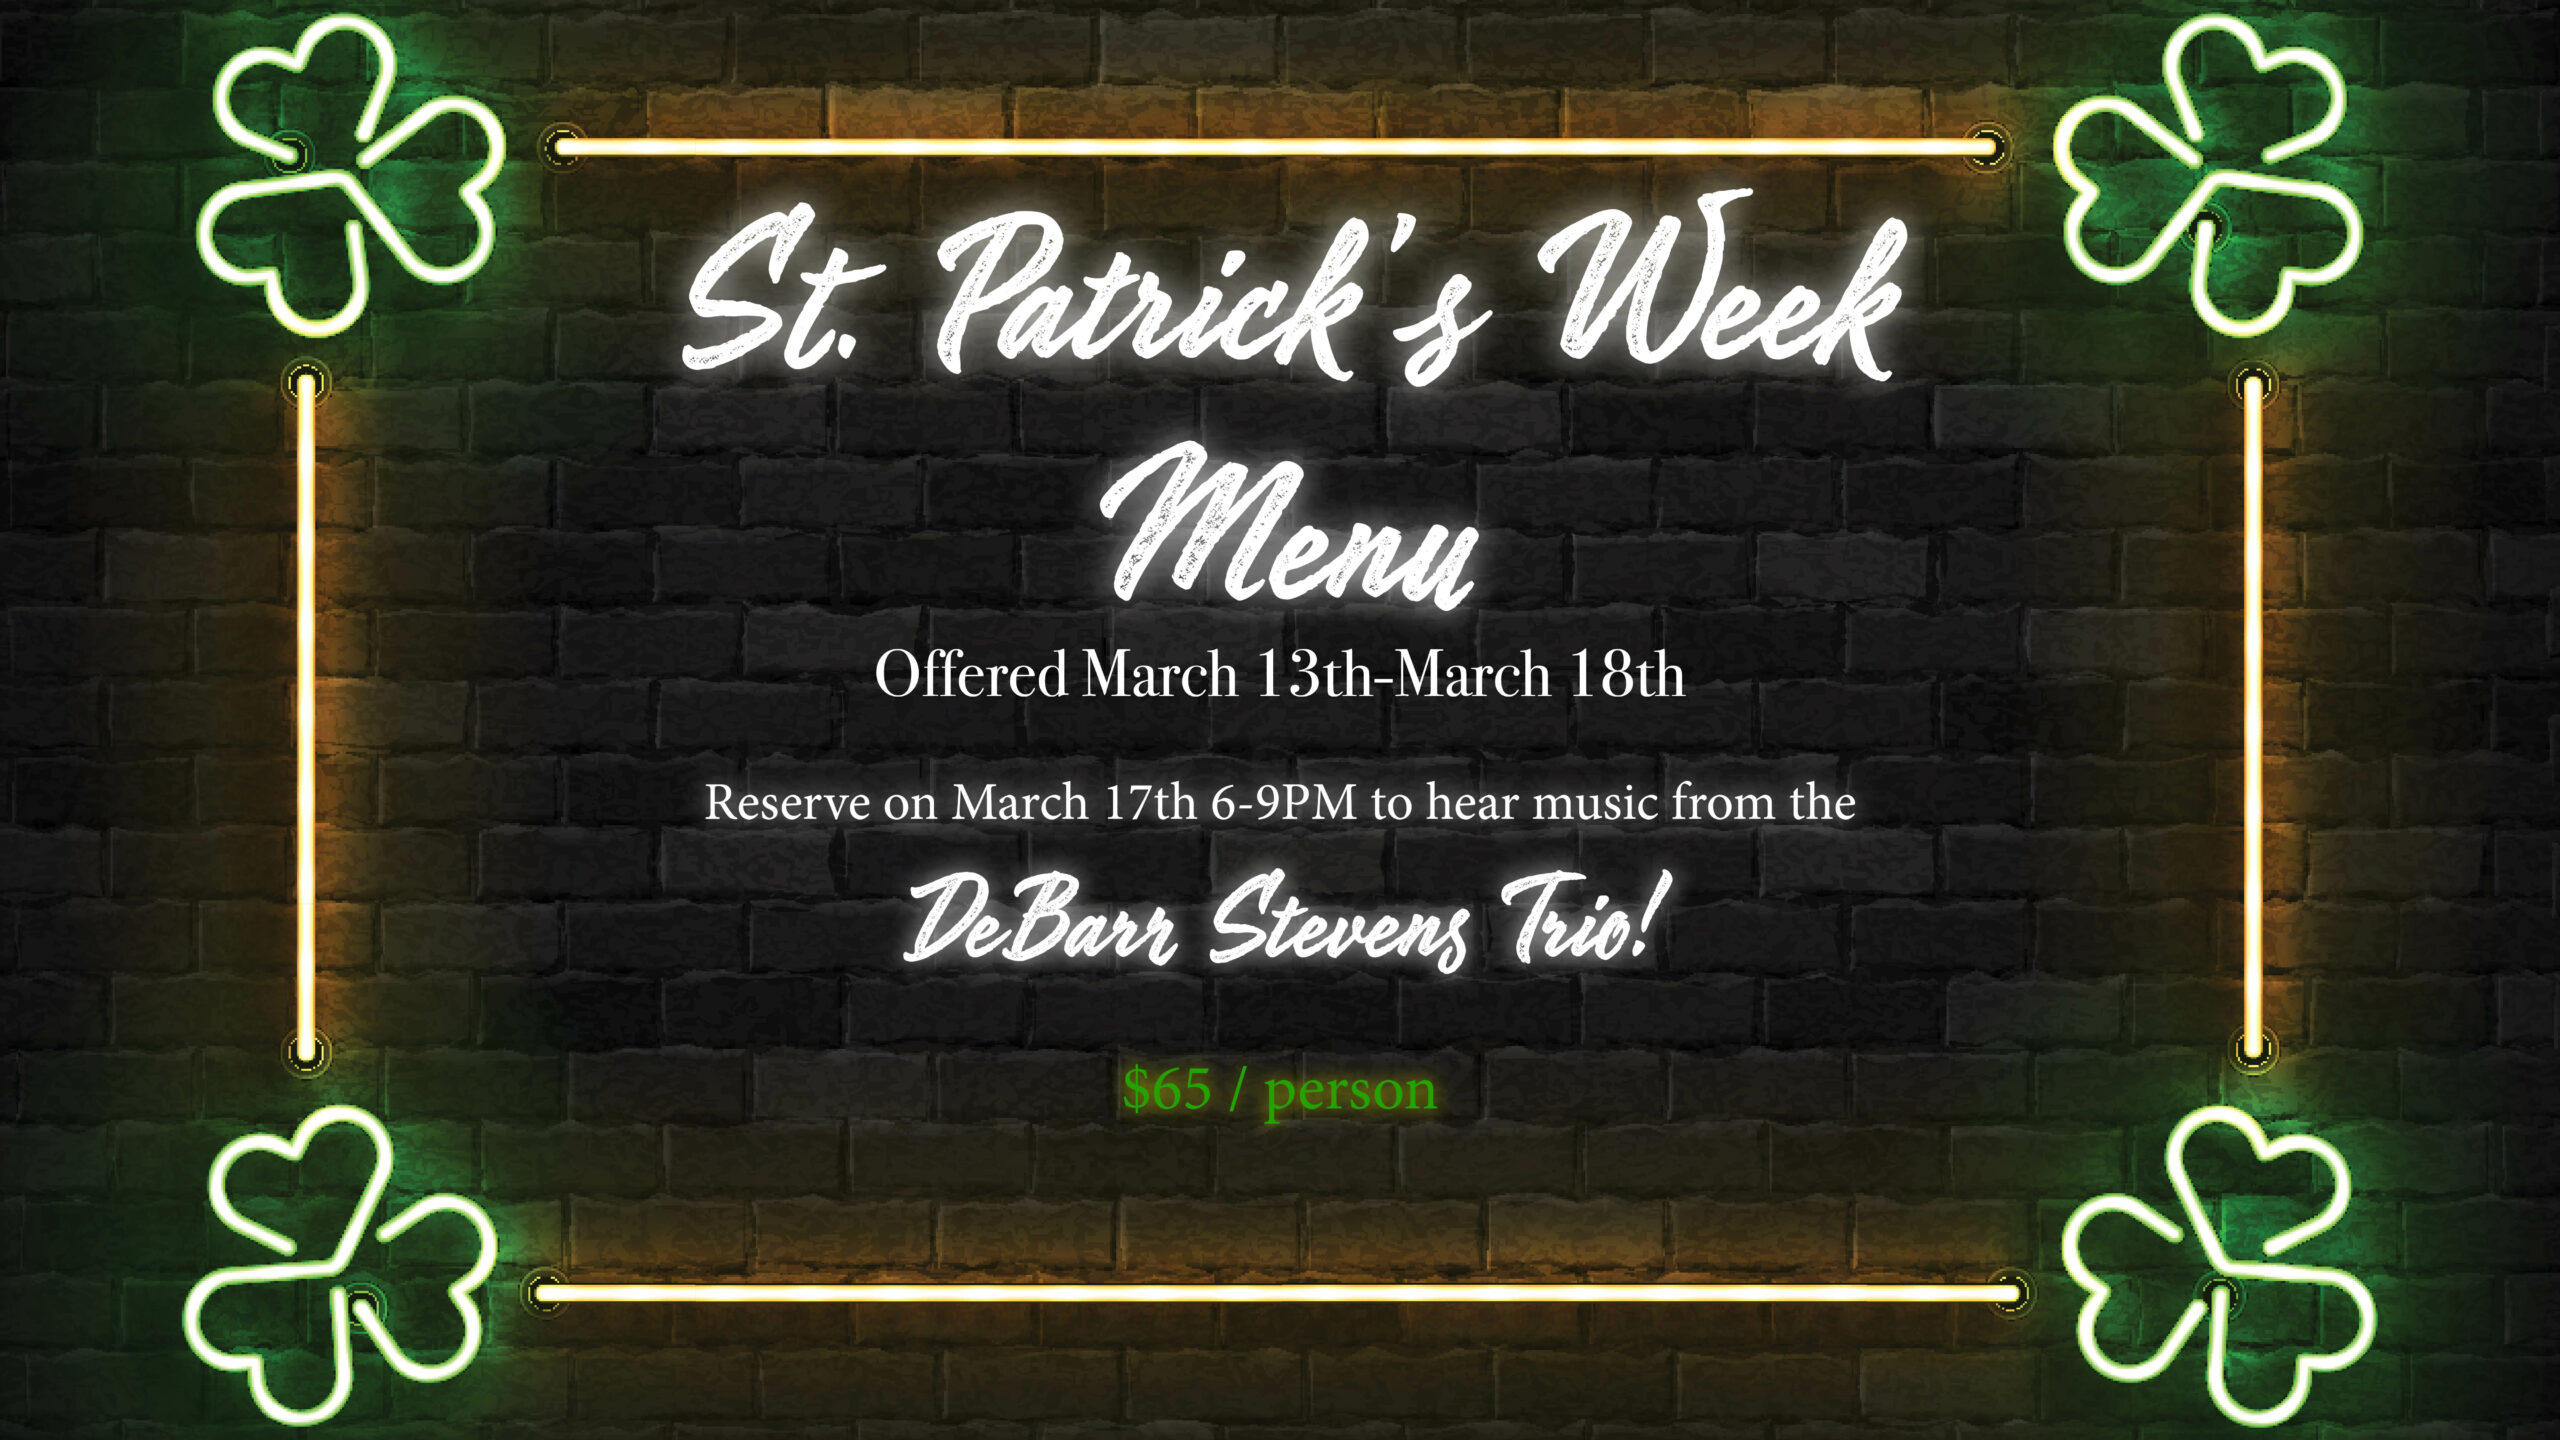 St Patrick's Week Menu offered march 13 - 18 with music on march 17th from 6 pm to 9 pm by the debarr stevens trio